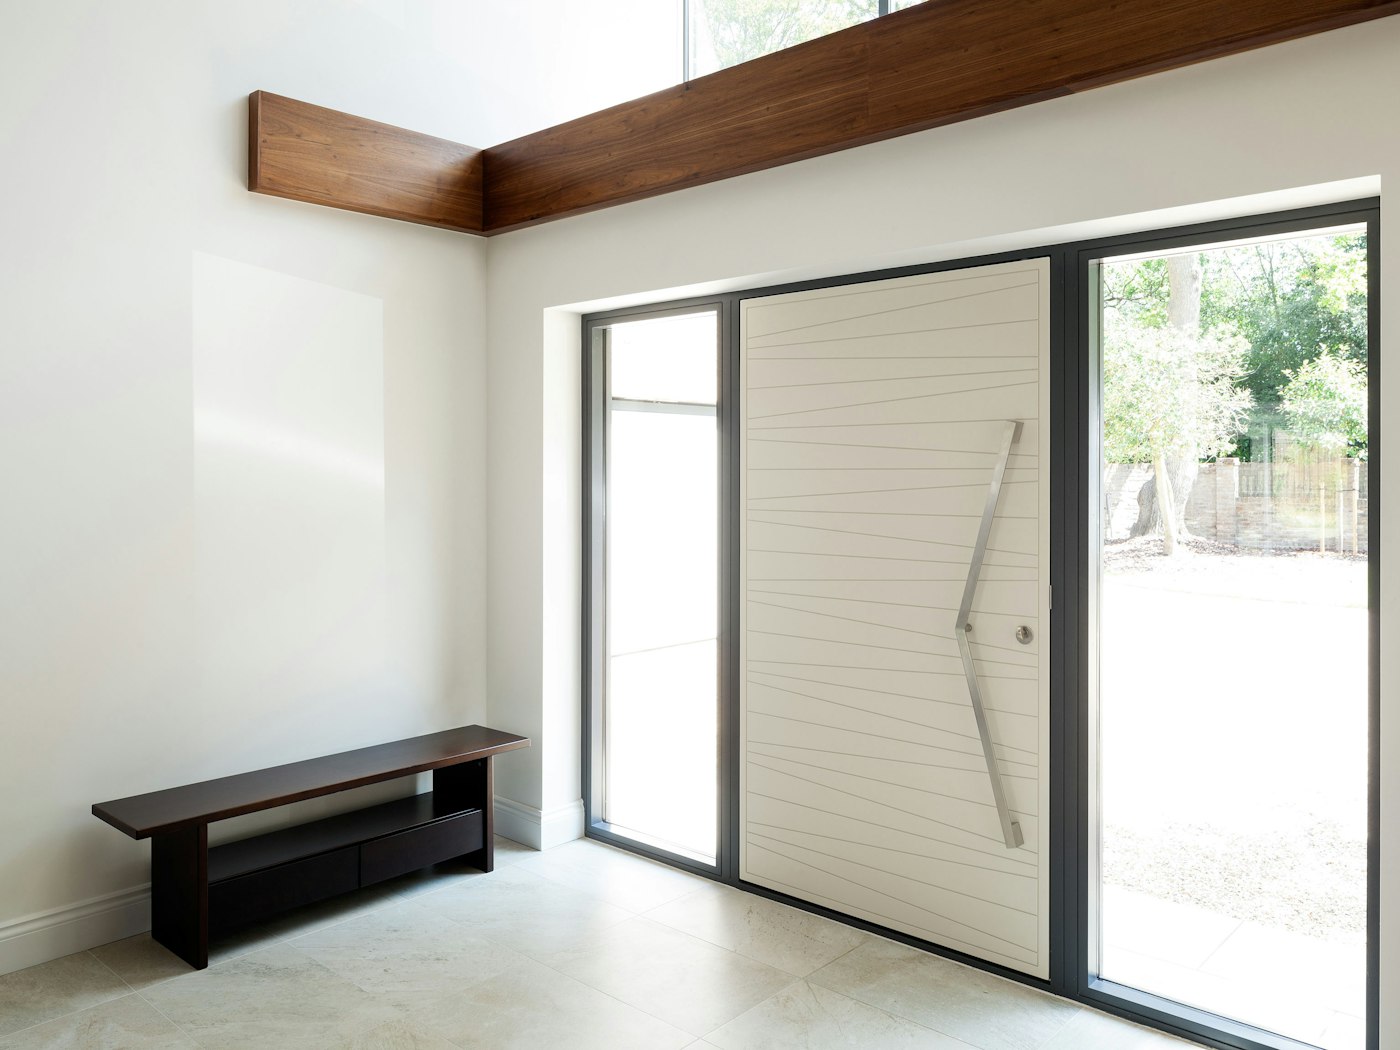 The glass panels next to the front door allow extra internal light